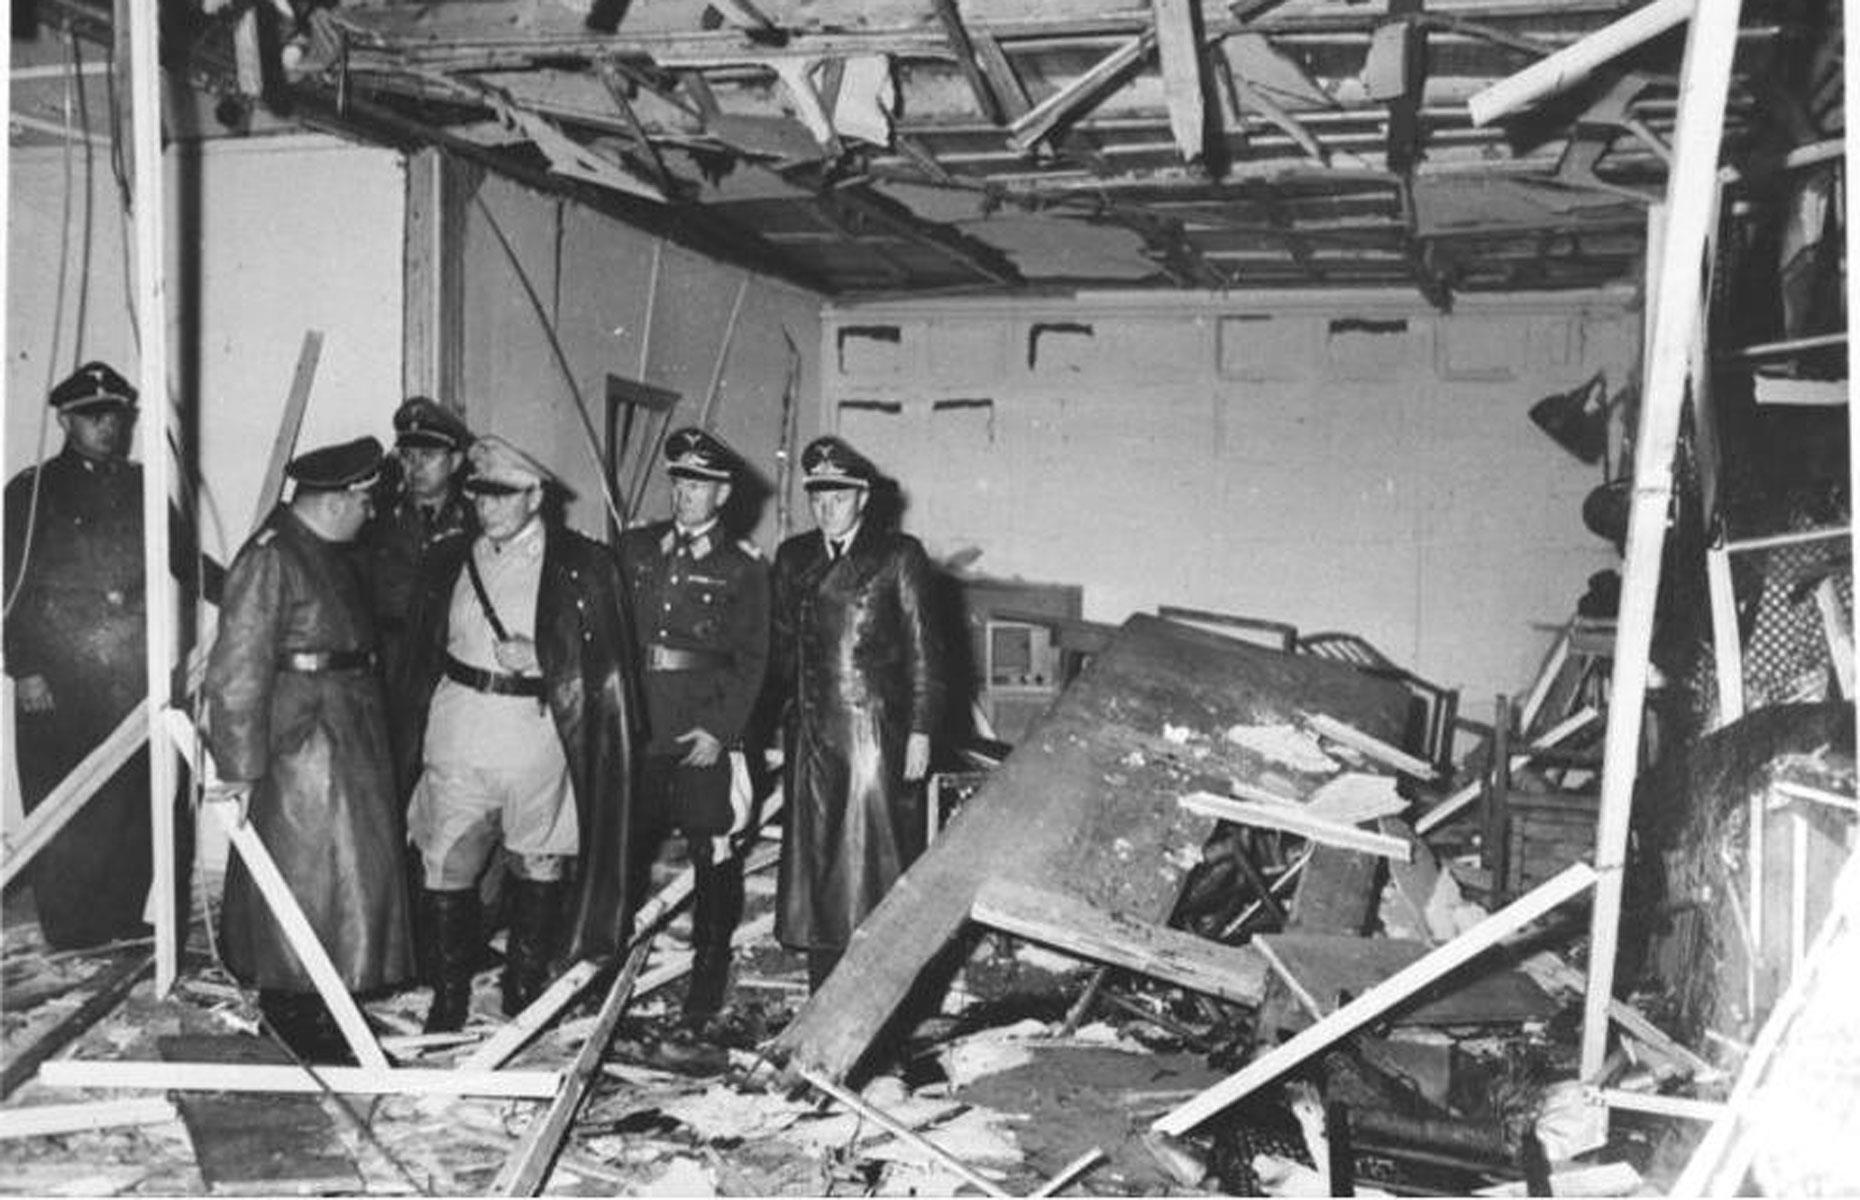 <p>Hitler's suspicions were validated on 20 July 1944 when a group of high-ranking Wehrmacht officers, led by Colonel Claus von Stauffenberg, attempted to <a href="https://wolfsschanze.pl/en/assassination-attempt/">assassinate</a> him by placing a briefcase bomb near his desk in the Wolf Lair's conference room. The briefcase was moved just before the device detonated, which saved Hitler's life. The original plan was to plant the device in the bunker, which would almost certainly have killed him.</p>